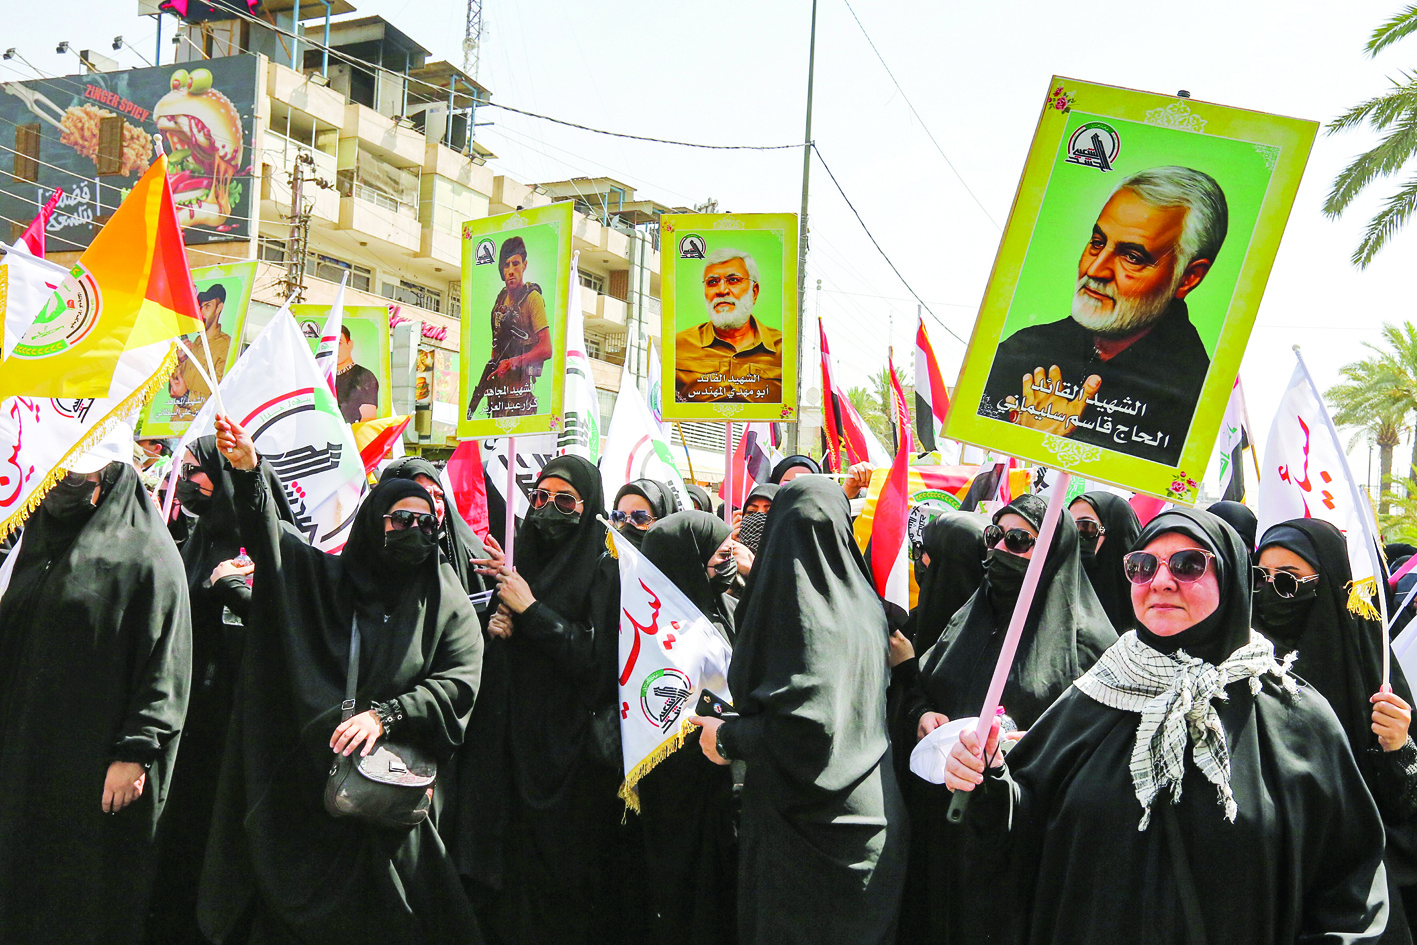 BAGHDAD: Women hold signs showing posters of (right to left) slain Iranian Revolutionary Guards commander Qasem Soleimani and Iraq's Hashed Al-Shaabi commander Abu Mahdi Al-Muhandis (both assassinated by a US drone strike in early 2020) and a slain Hashed fighter, during a symbolic funeral parade organized by the Hashed in the capital Baghdad yesterday.- AFPnn